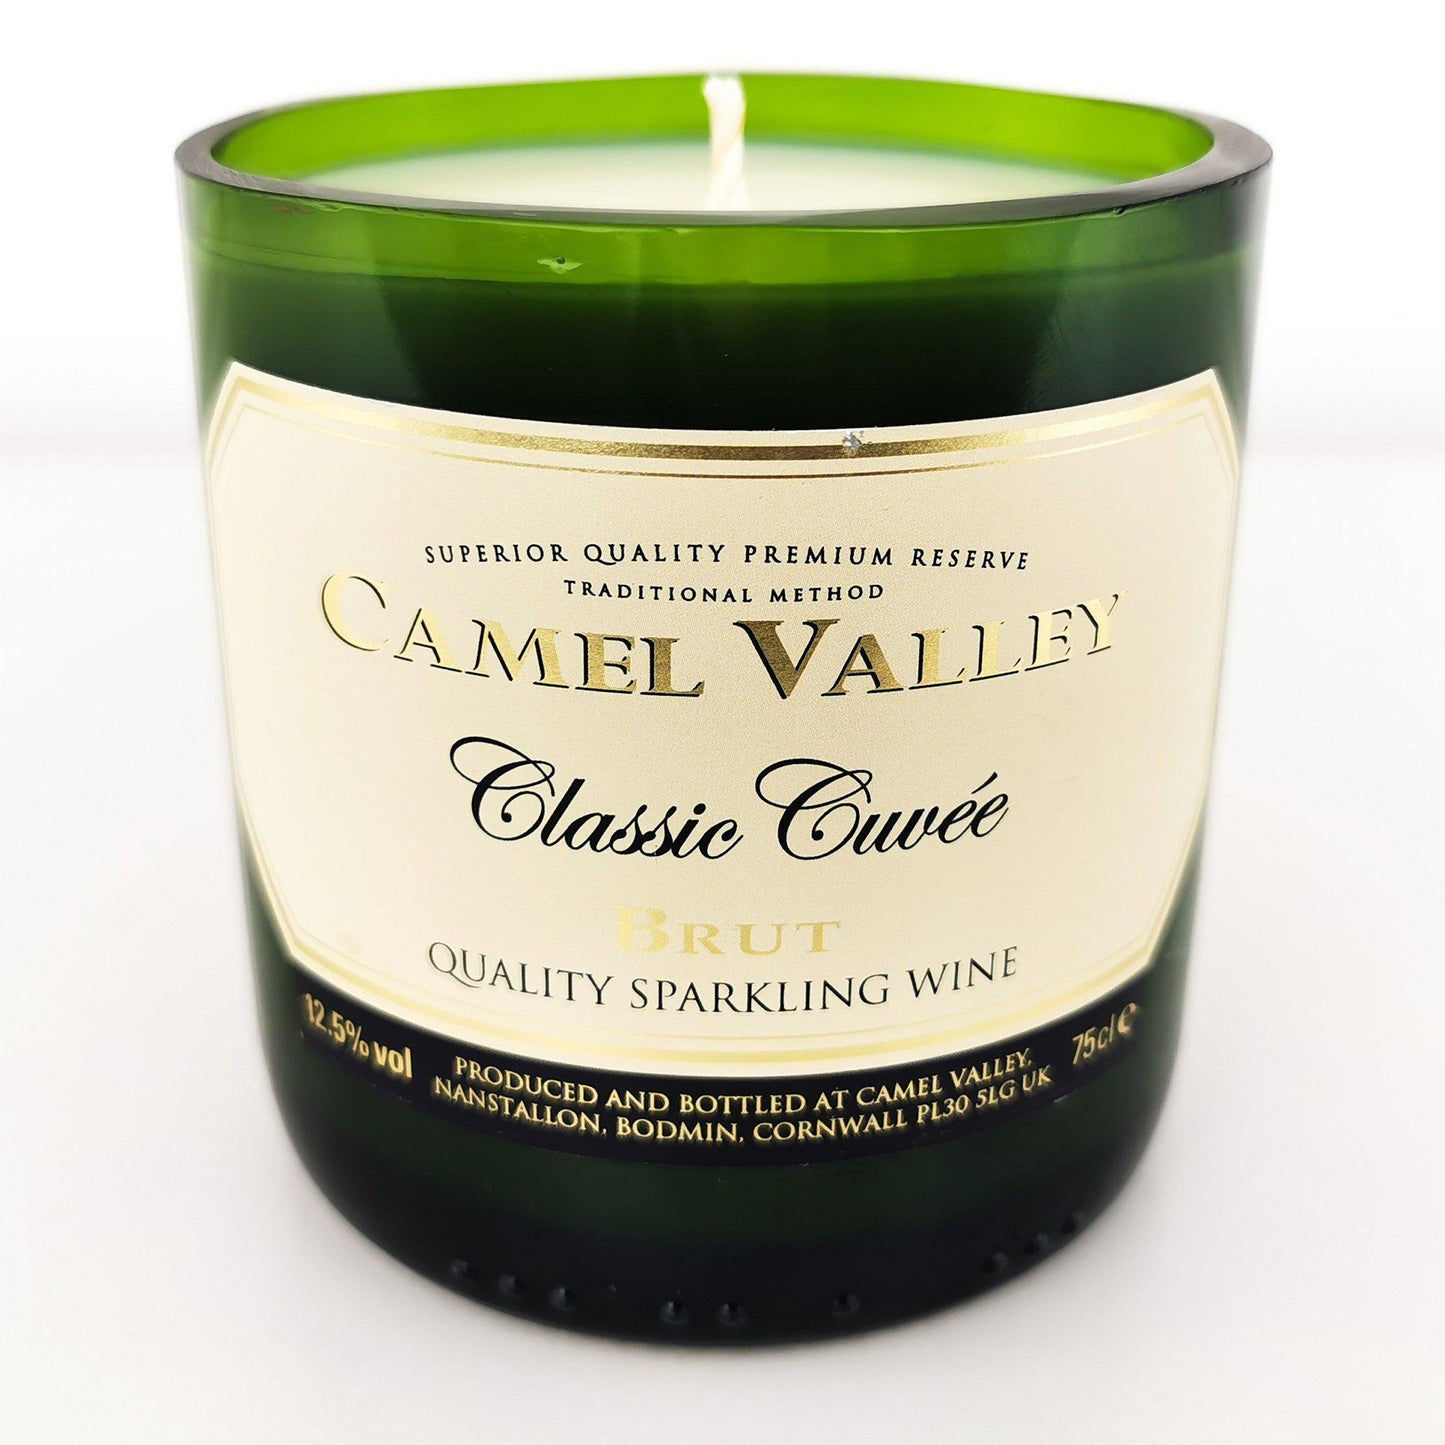 Camel Valley Classic Bottle Candle Wine & Prosecco Bottle Candles Adhock Homeware